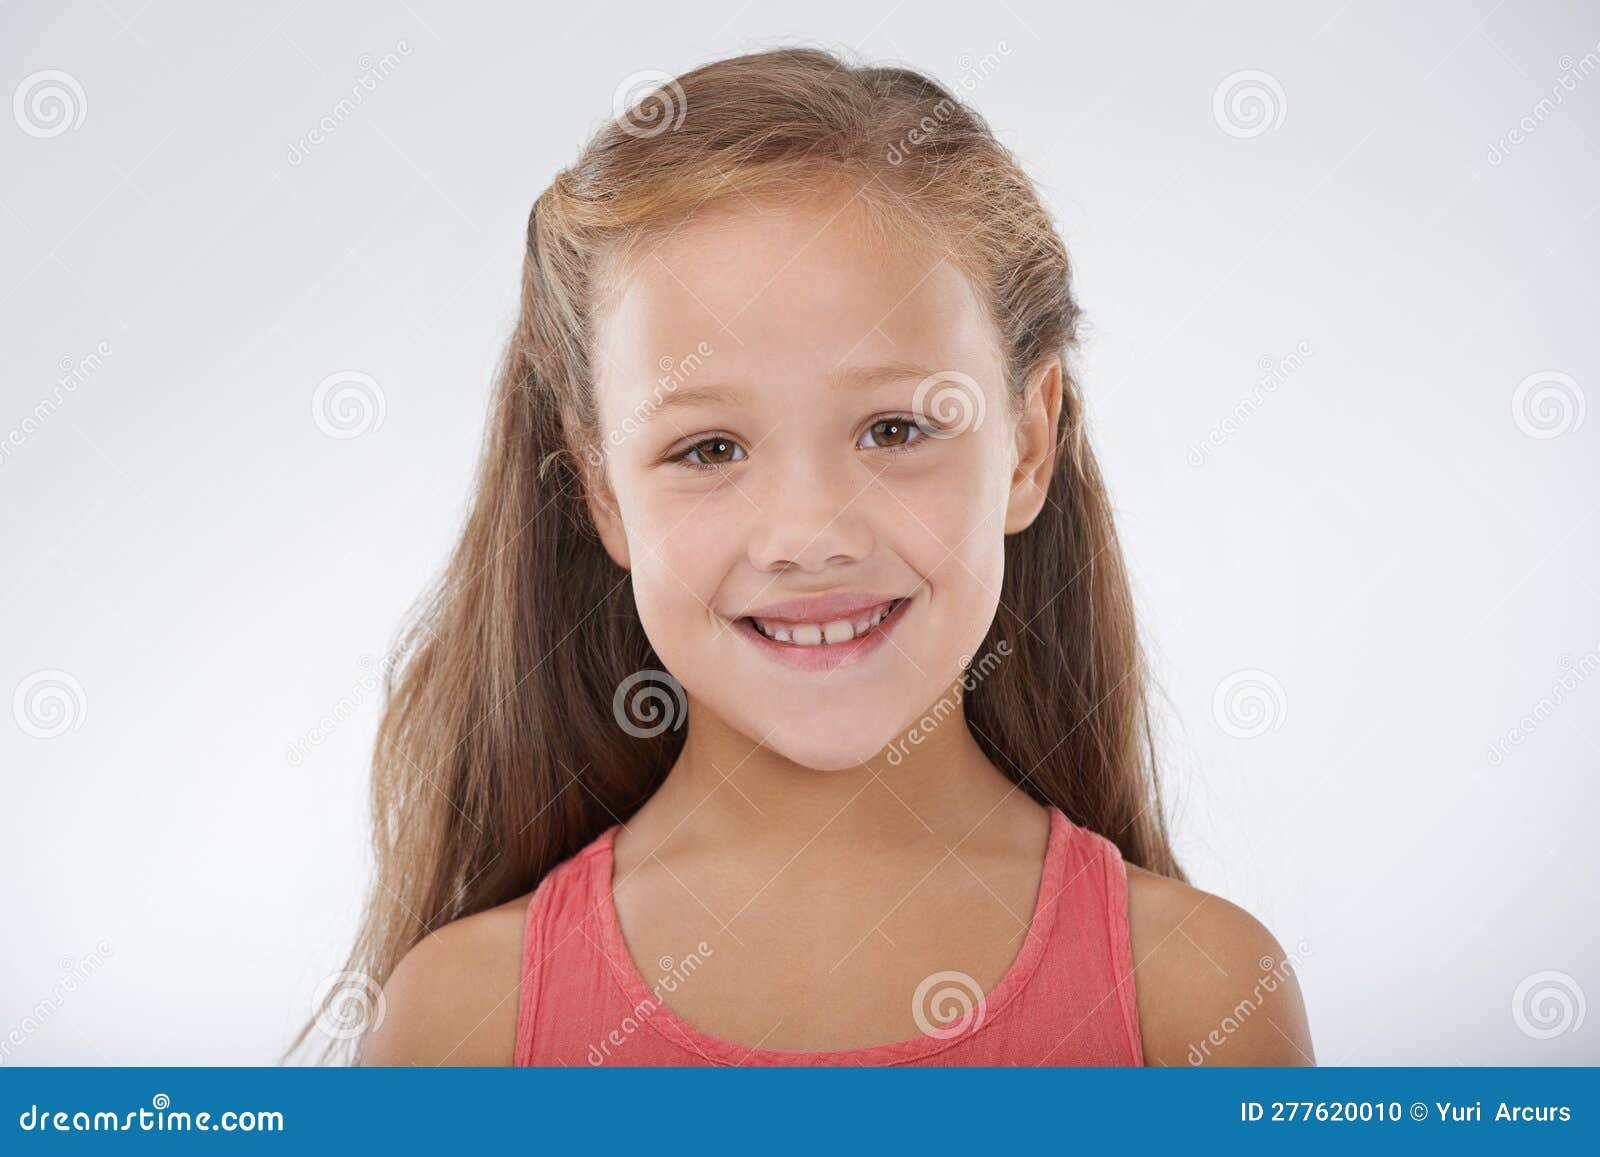 What A Cutie Studio Portrait Of An Adorable Young Girl Smiling At The